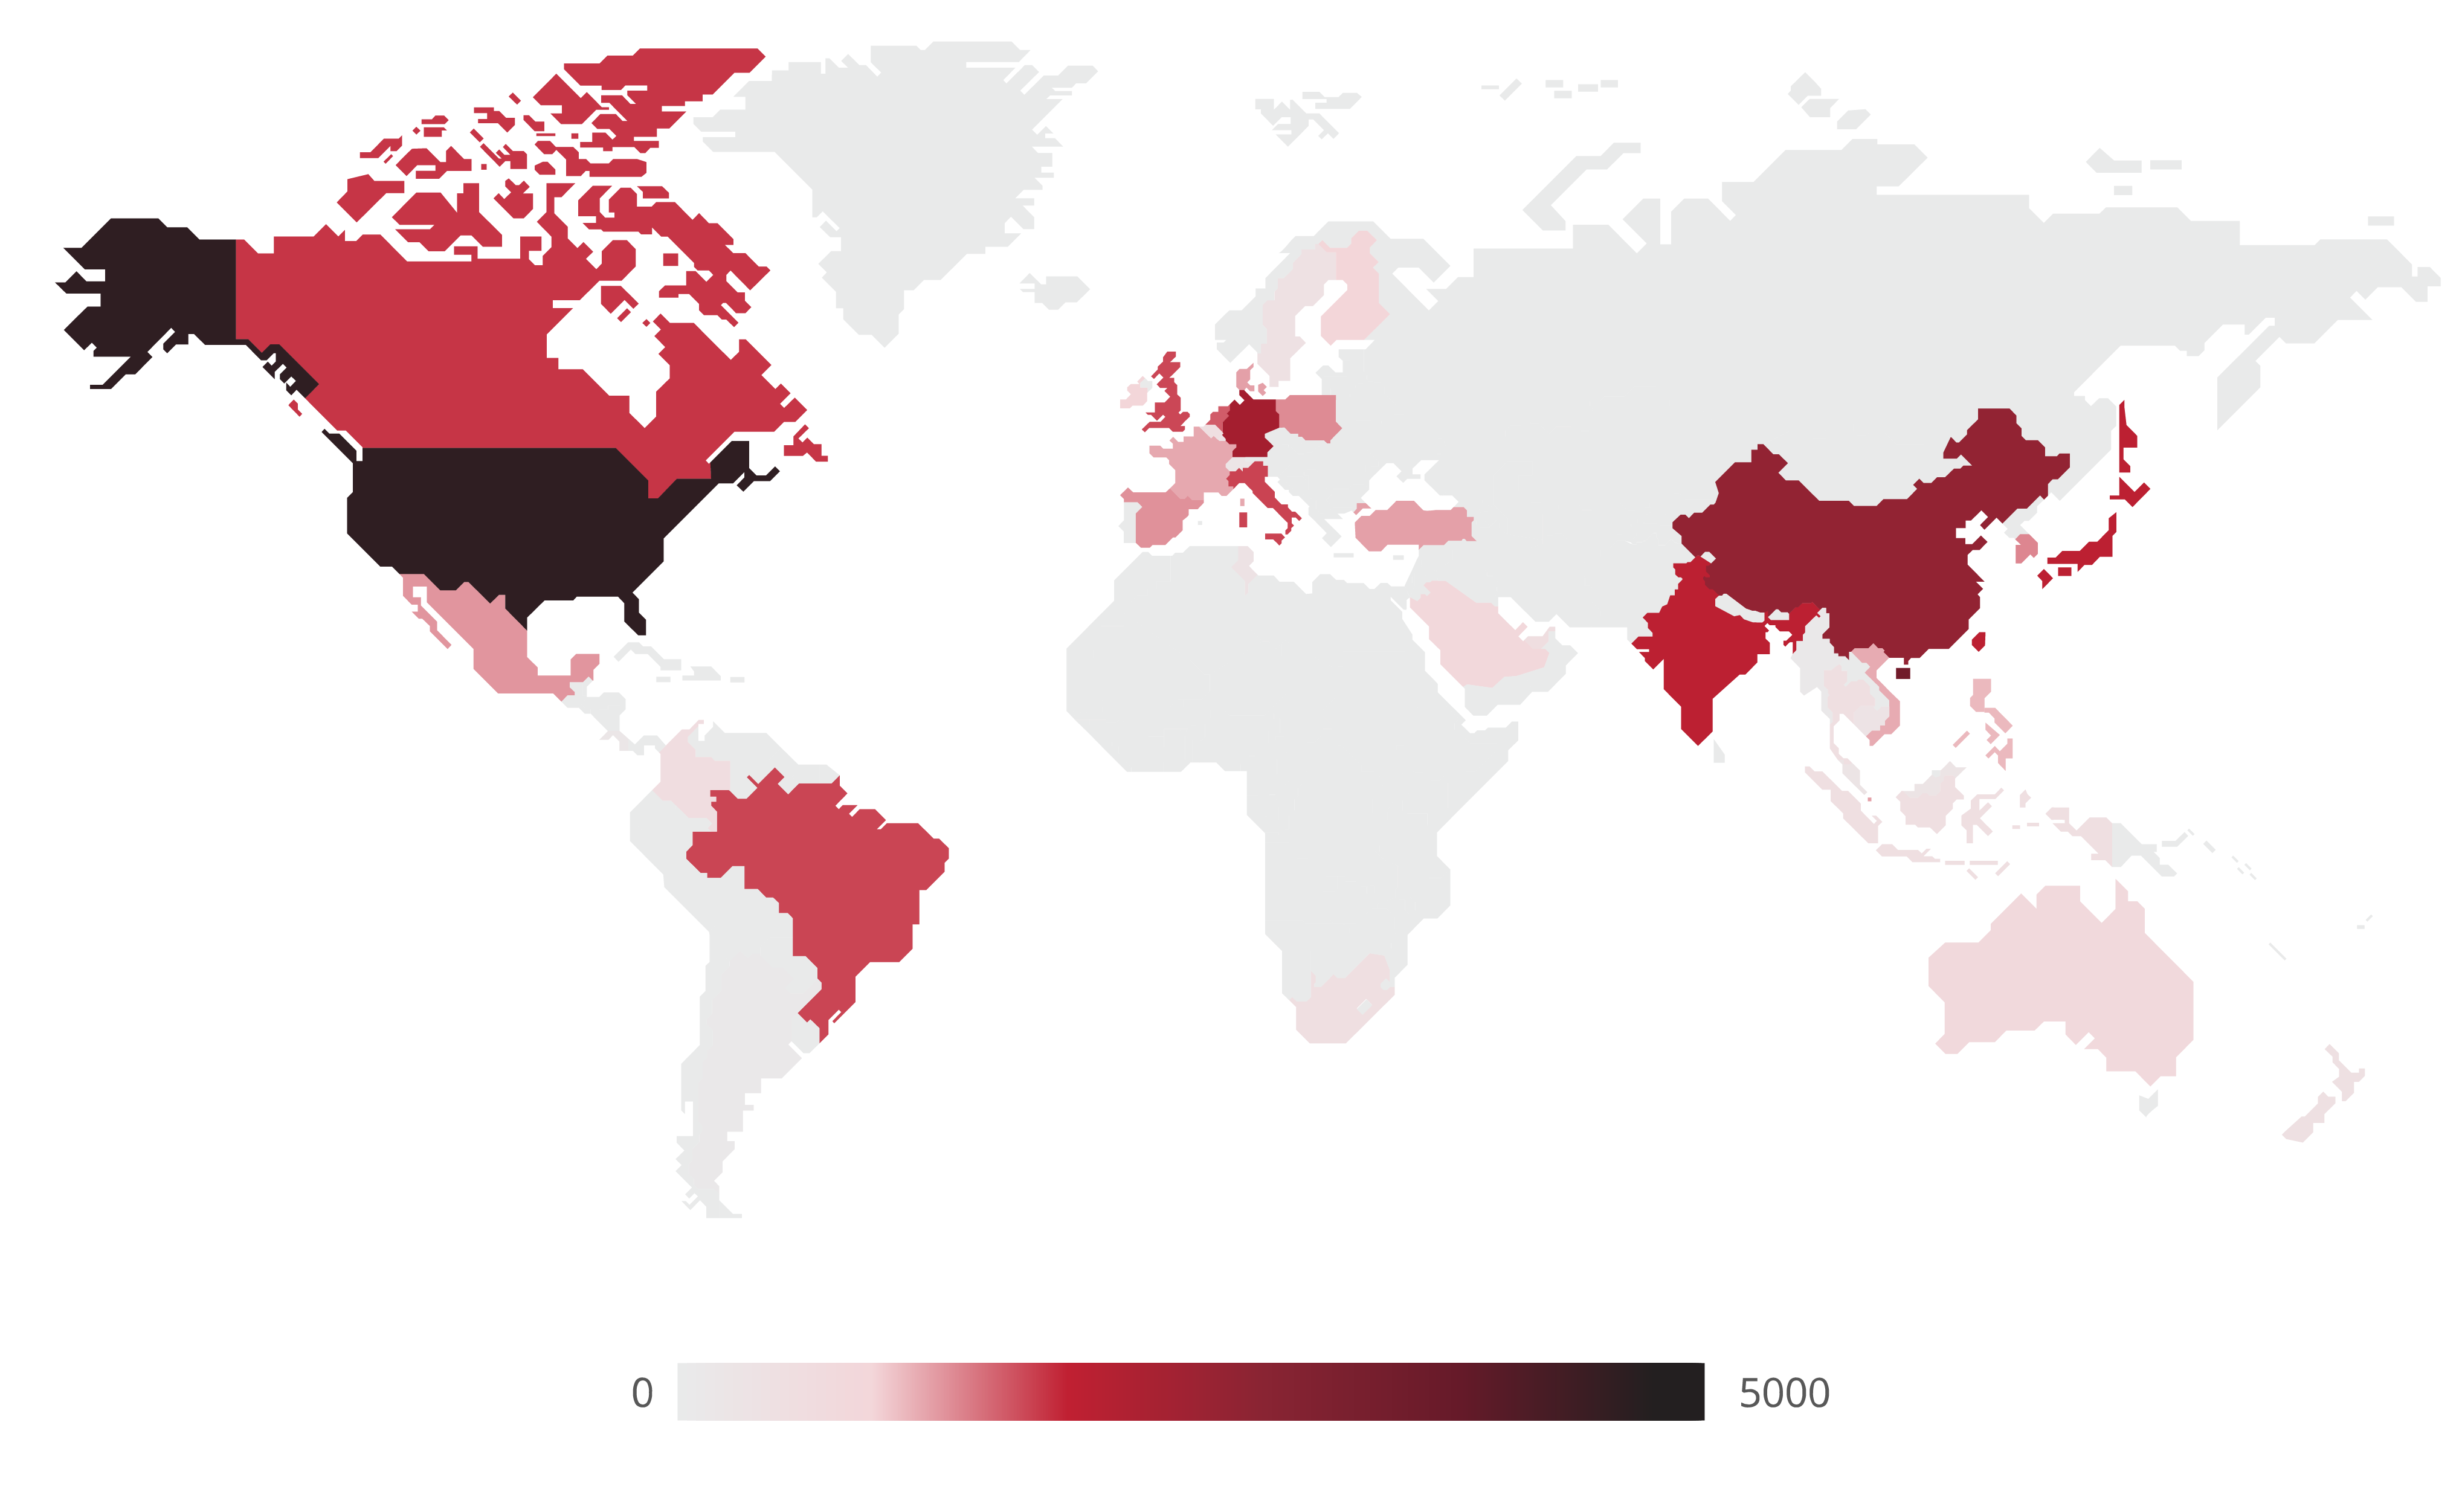 A heat map of the world showing the number of UL employees around the globe